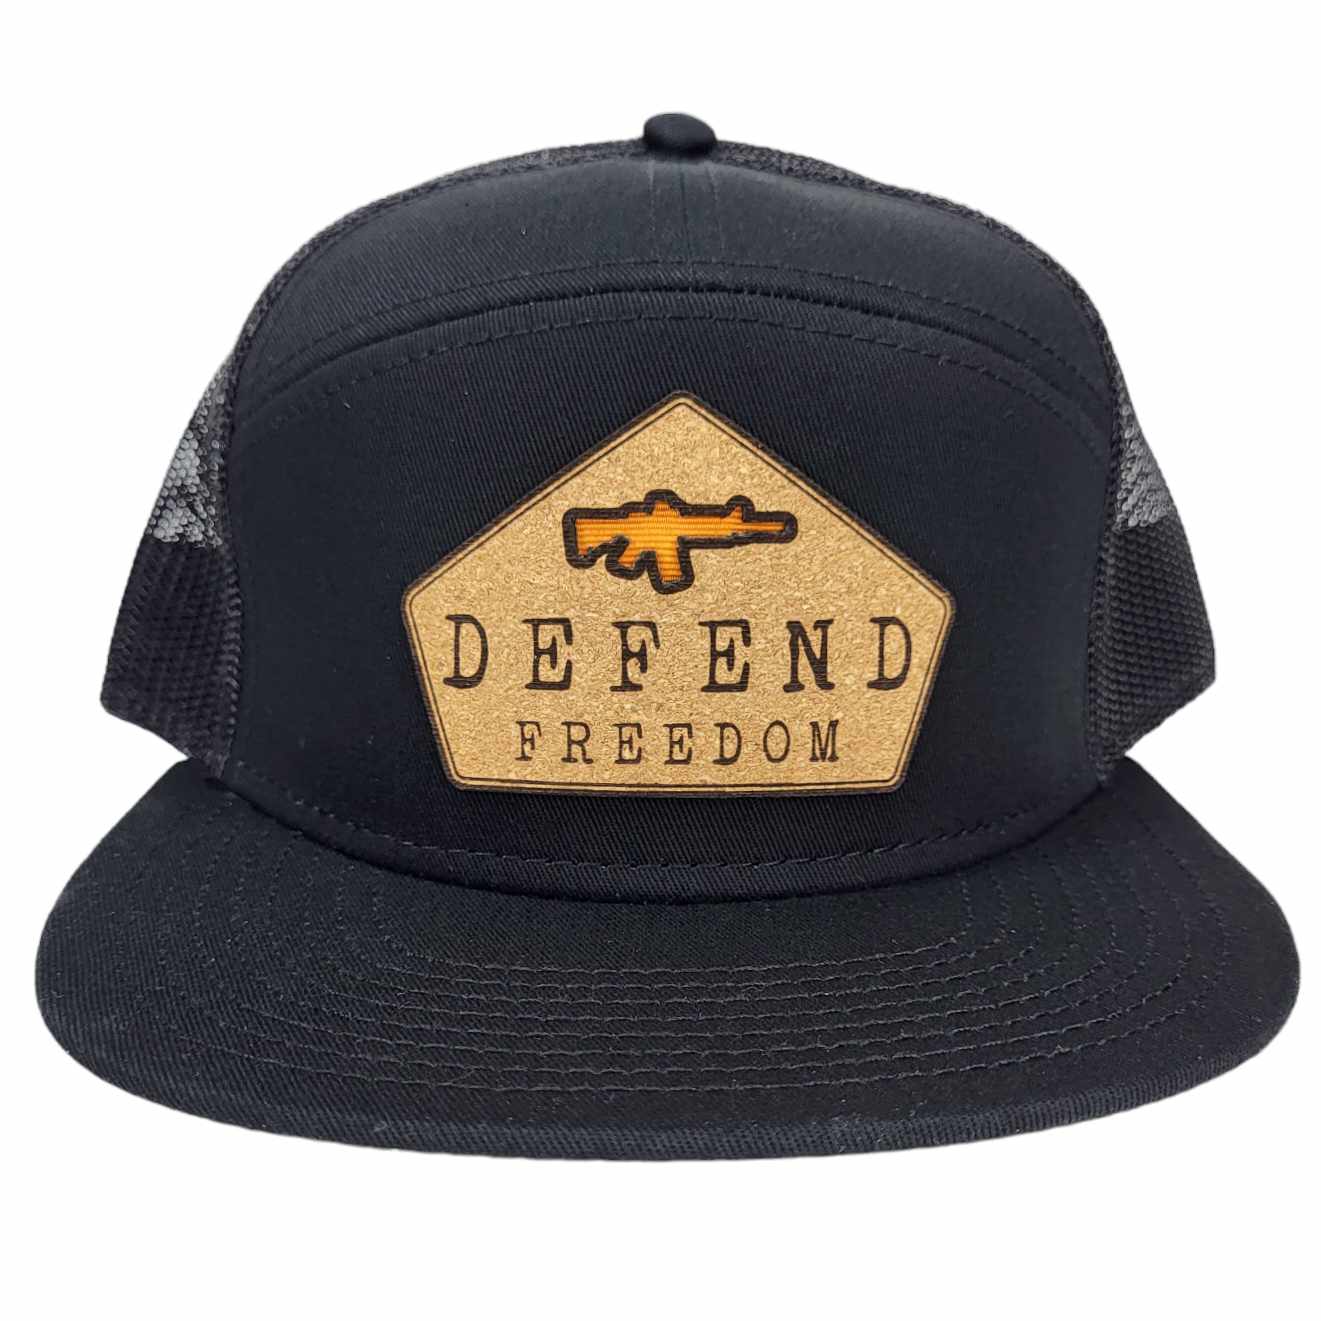 Defend Freedom Cork Patch Hat